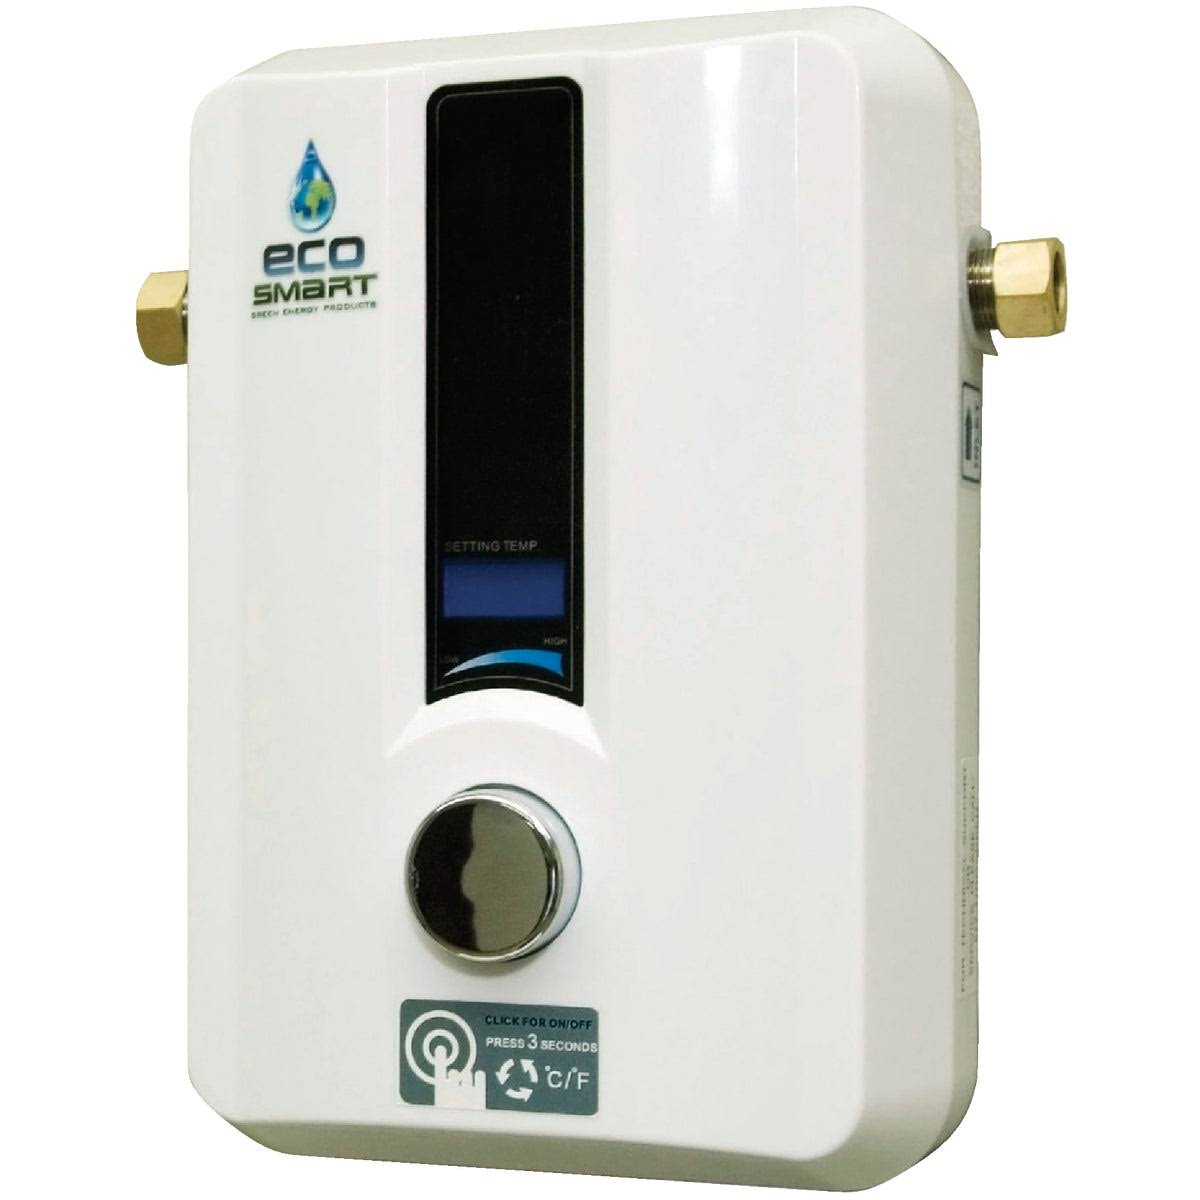 EcoSmart Self-Modulating Electric Tankless Water Heater - 1.55 GPM, 8 kW